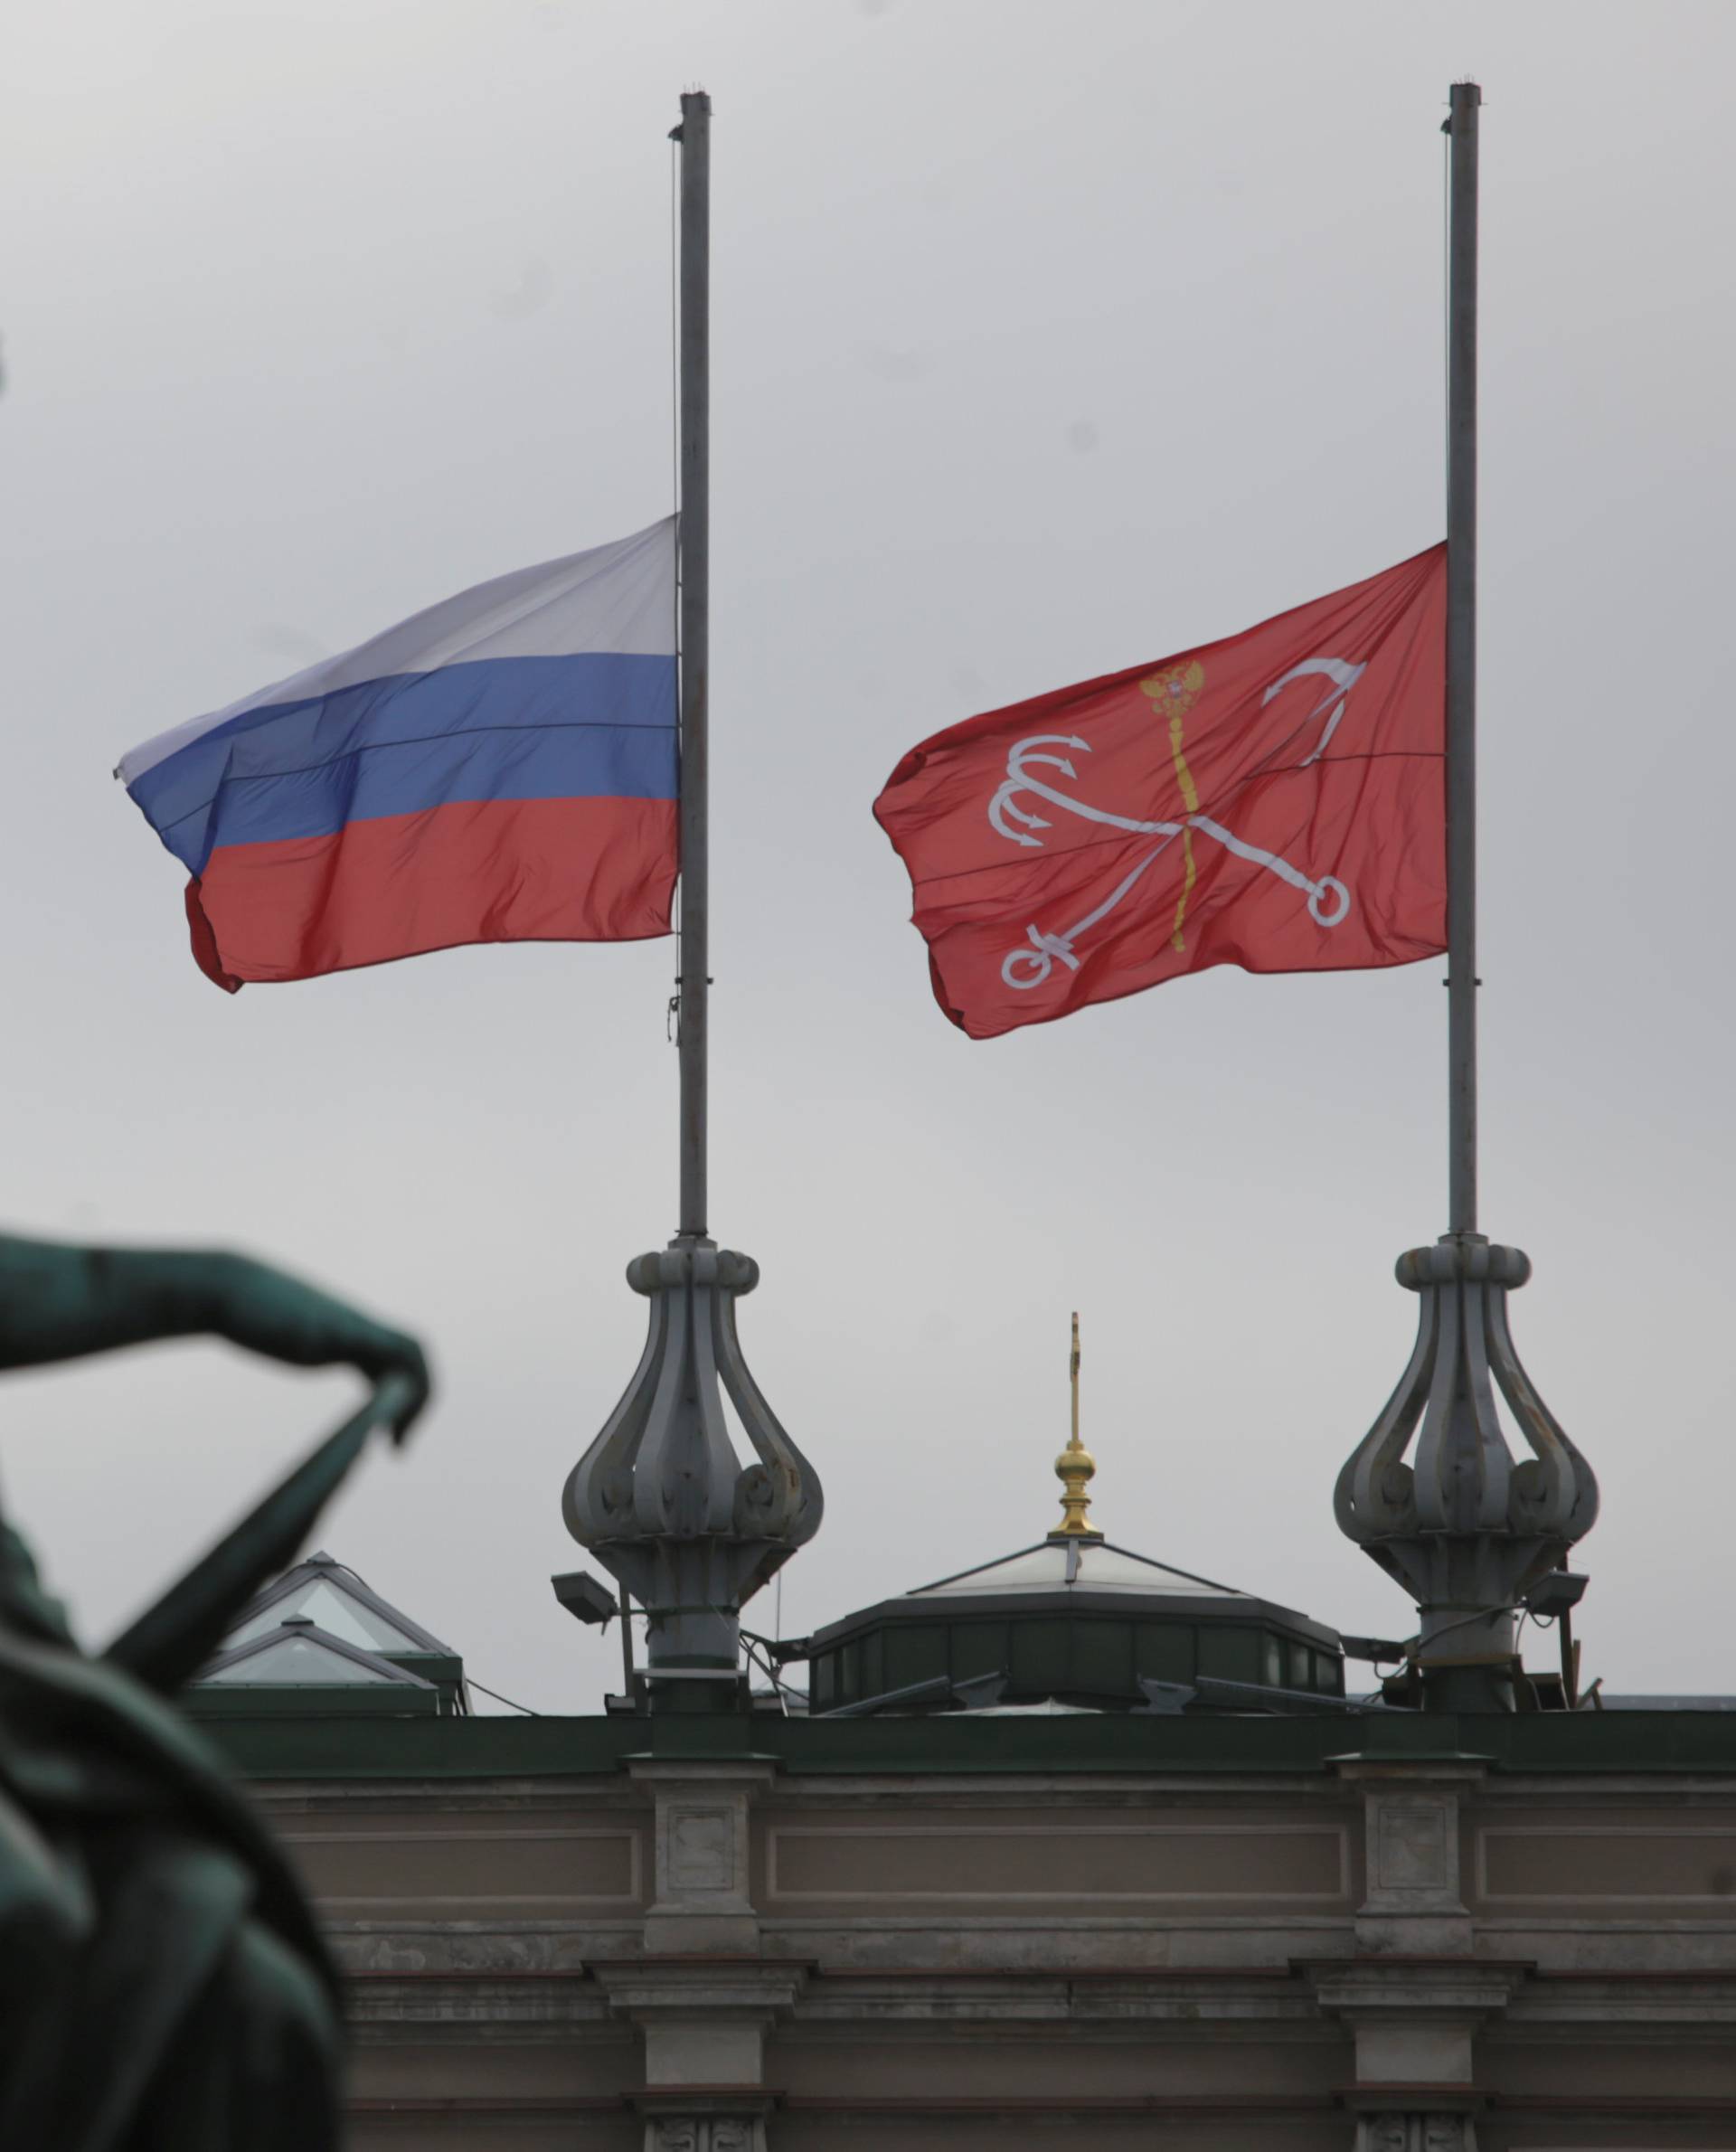 The Russian national flag and the flag of St. Petersburg fly at half-mast in tribute to the victims of a blast in St.Petersburg metro on April 3, at the Mariinsky theatre in St. Petersburg